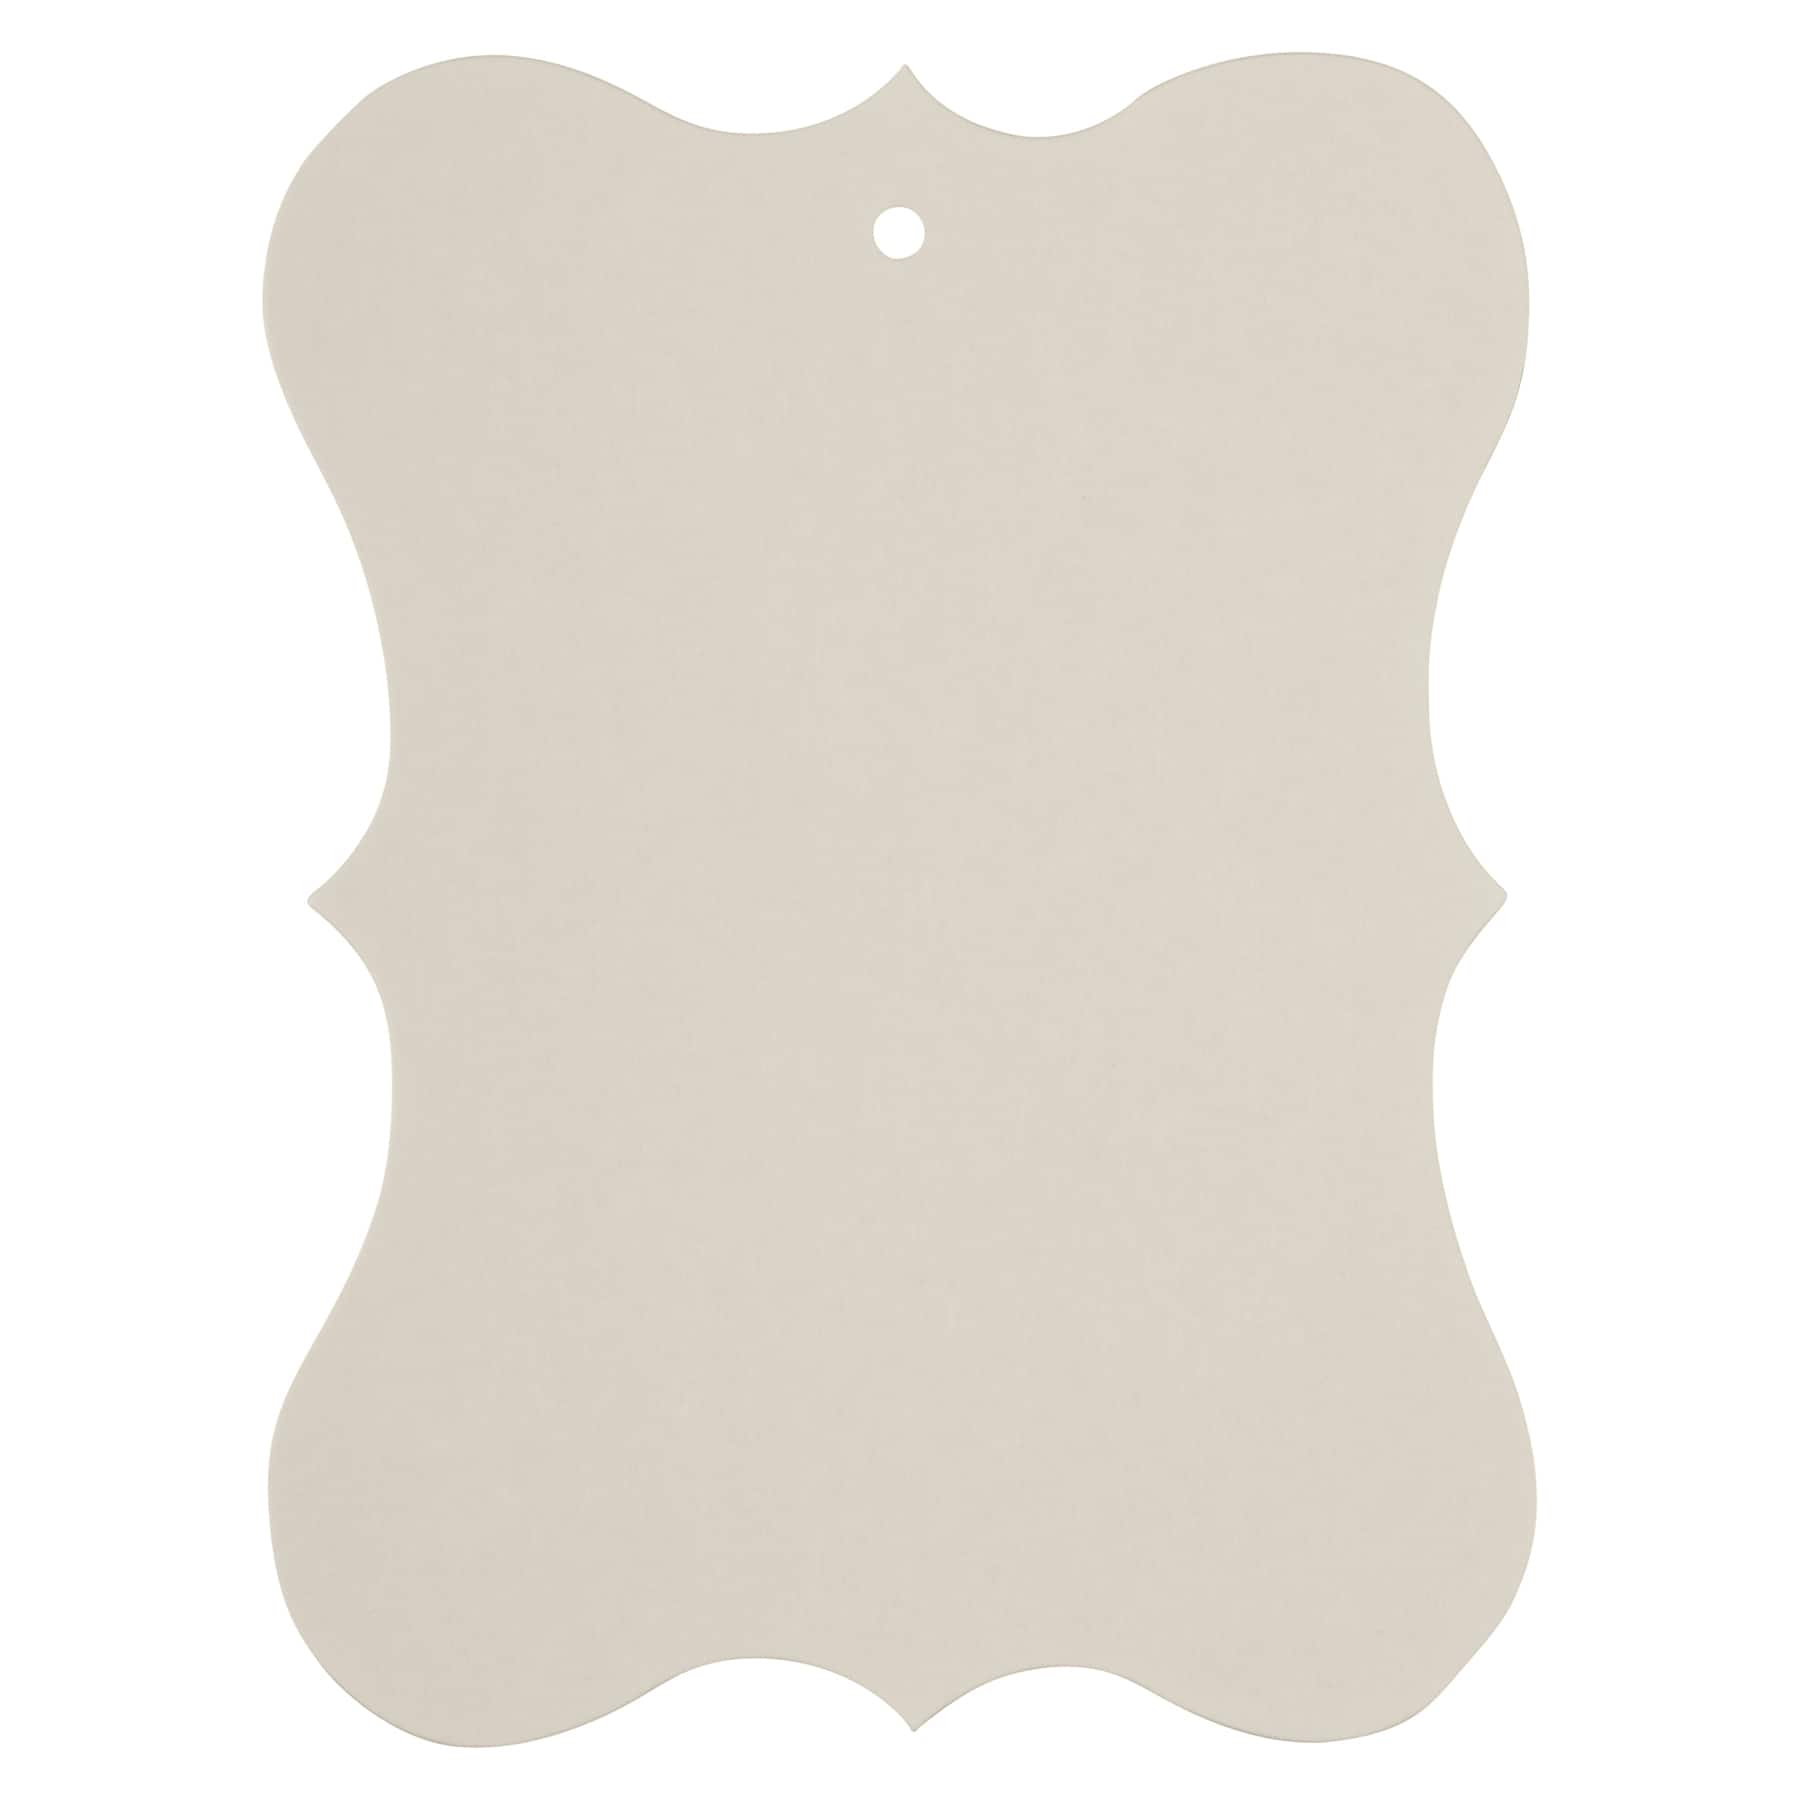 Large Kraft Tags by Recollections™